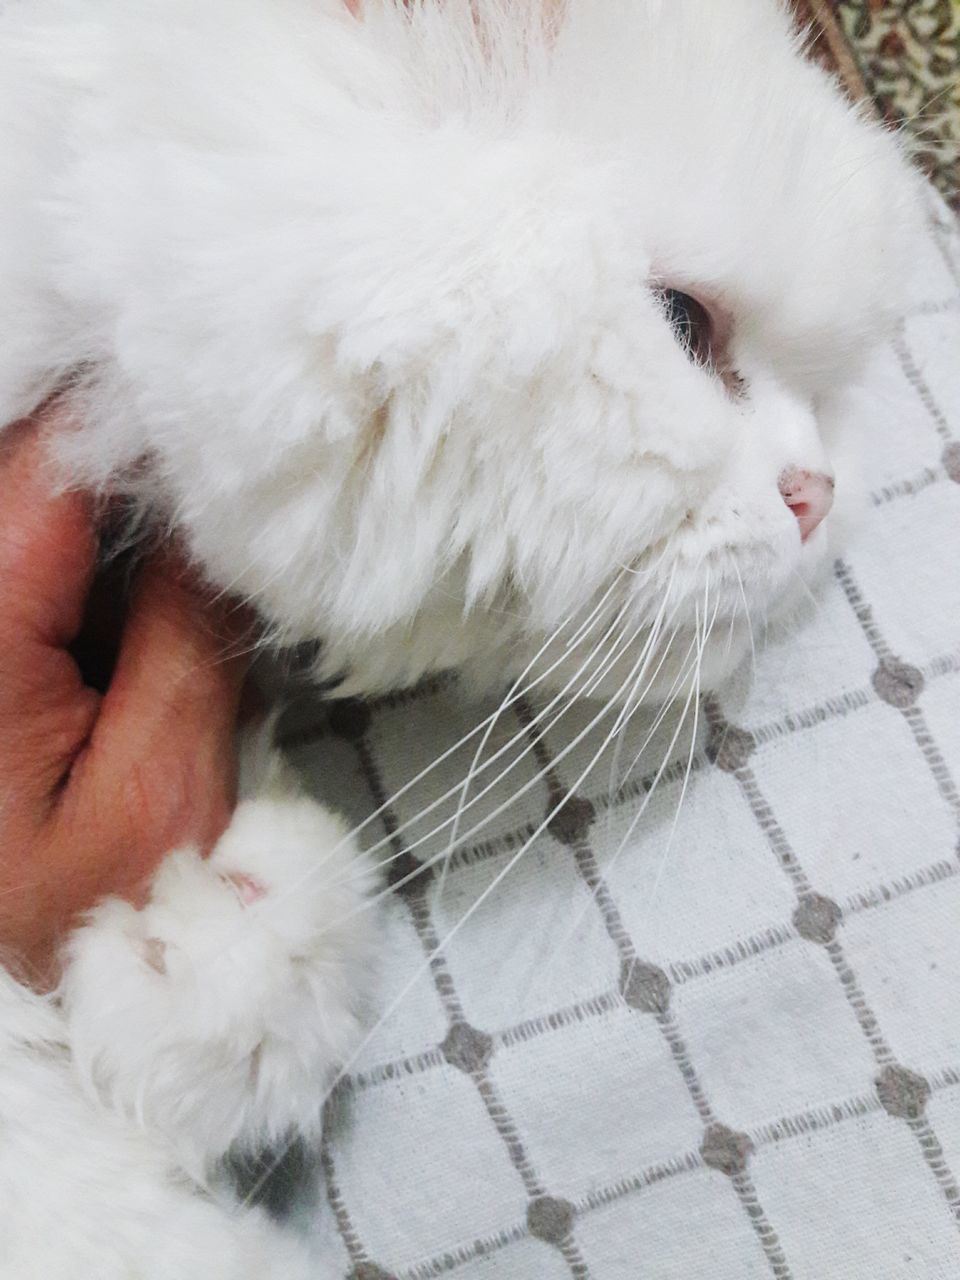 CLOSE-UP OF WHITE CAT WITH HAND ON BED